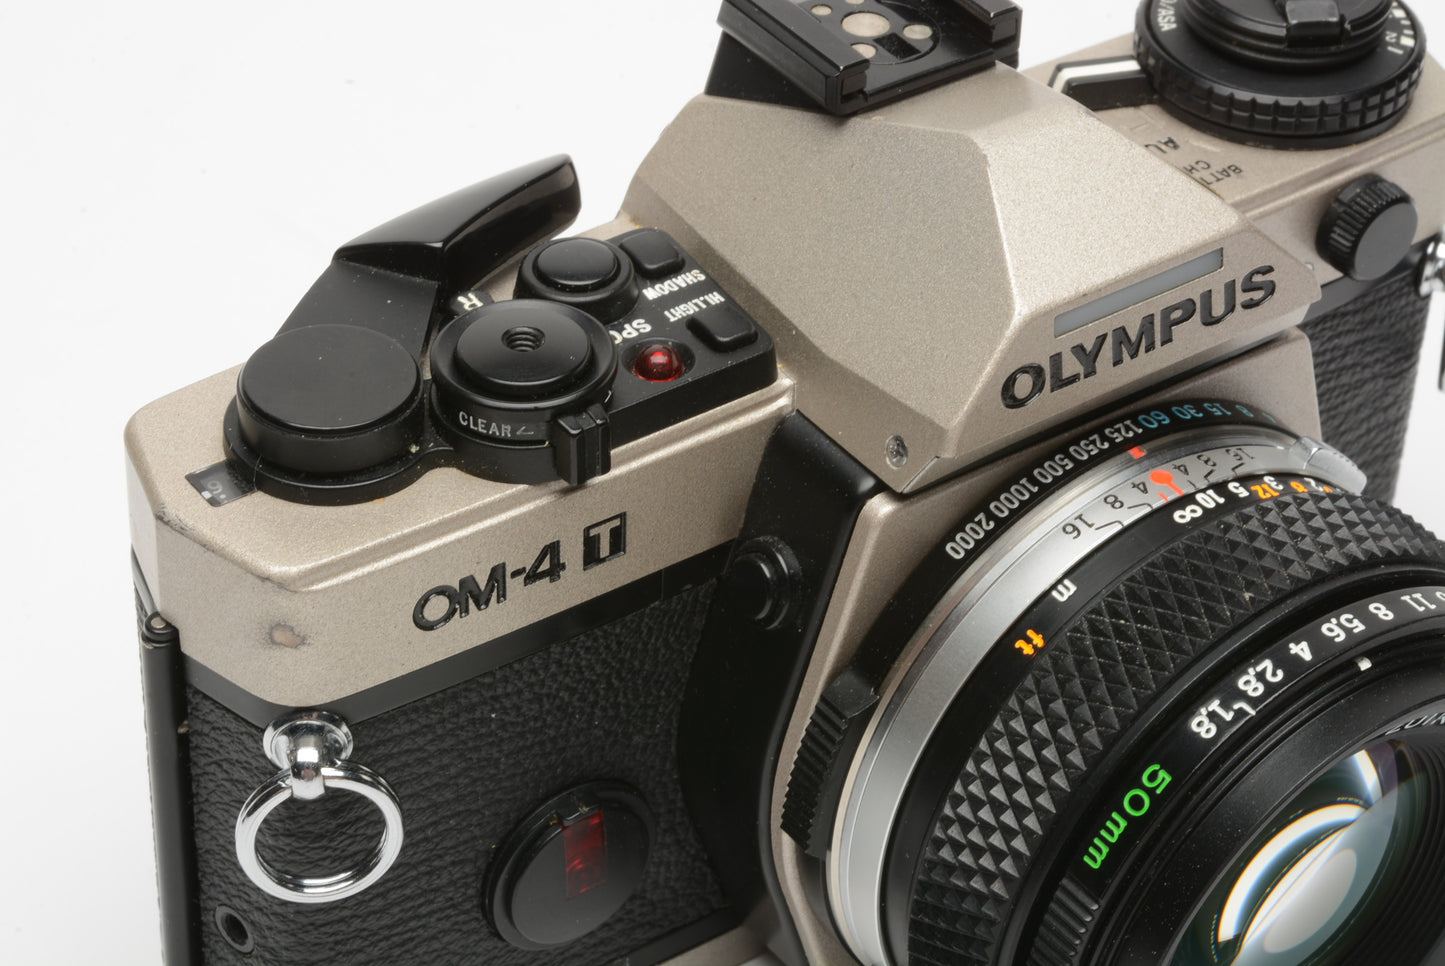 Olympus OM-4T (Champagne) w/Zuiko 50mm f1.8 lens, UV, manuals, tested, Great!